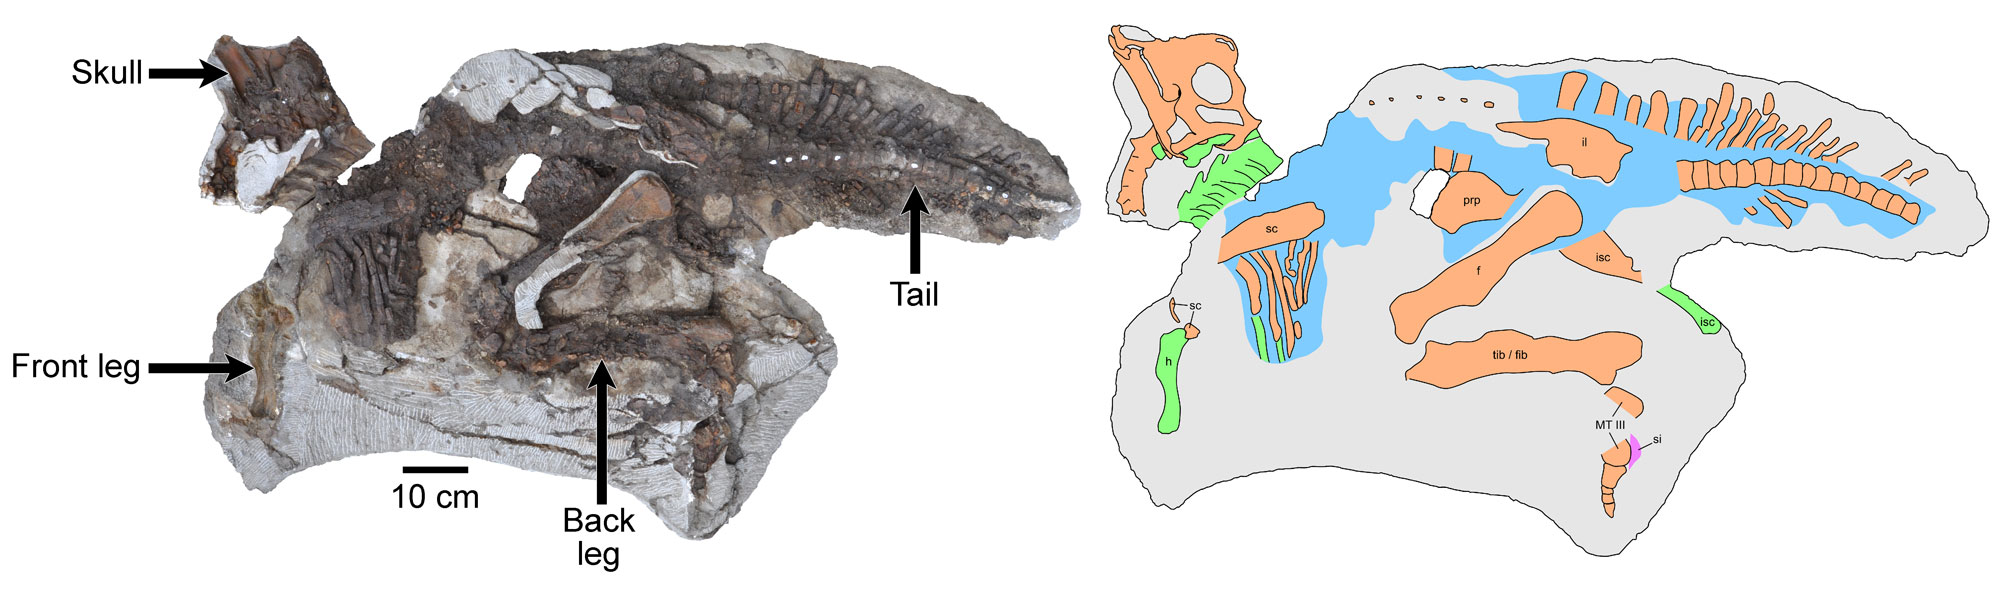 2-panel image of a juvenile Parasaurolophus (a hadrosaur or duck-billed dinosaur) from Utah. Panel 1: Specimen partially embedded in rock matrix with the skull, front leg, back leg, and tail labeled. Panel 2: Drawing of the same specimen with bones color-coded to indicate preservation as bone, bone impressions, weathered bone, and skin.